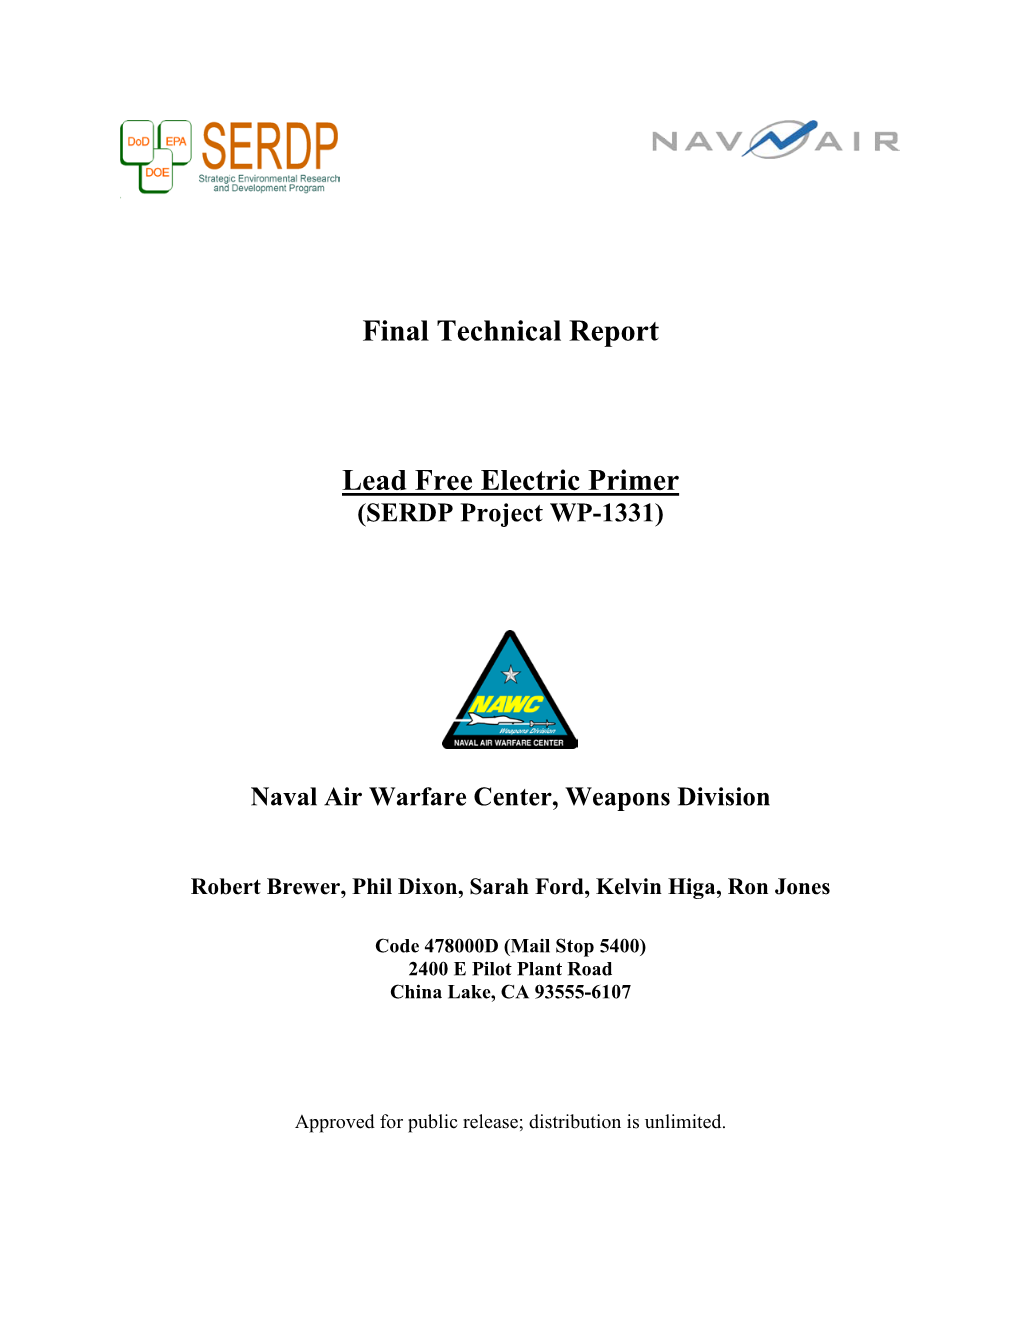 Final Technical Report Lead Free Electric Primer